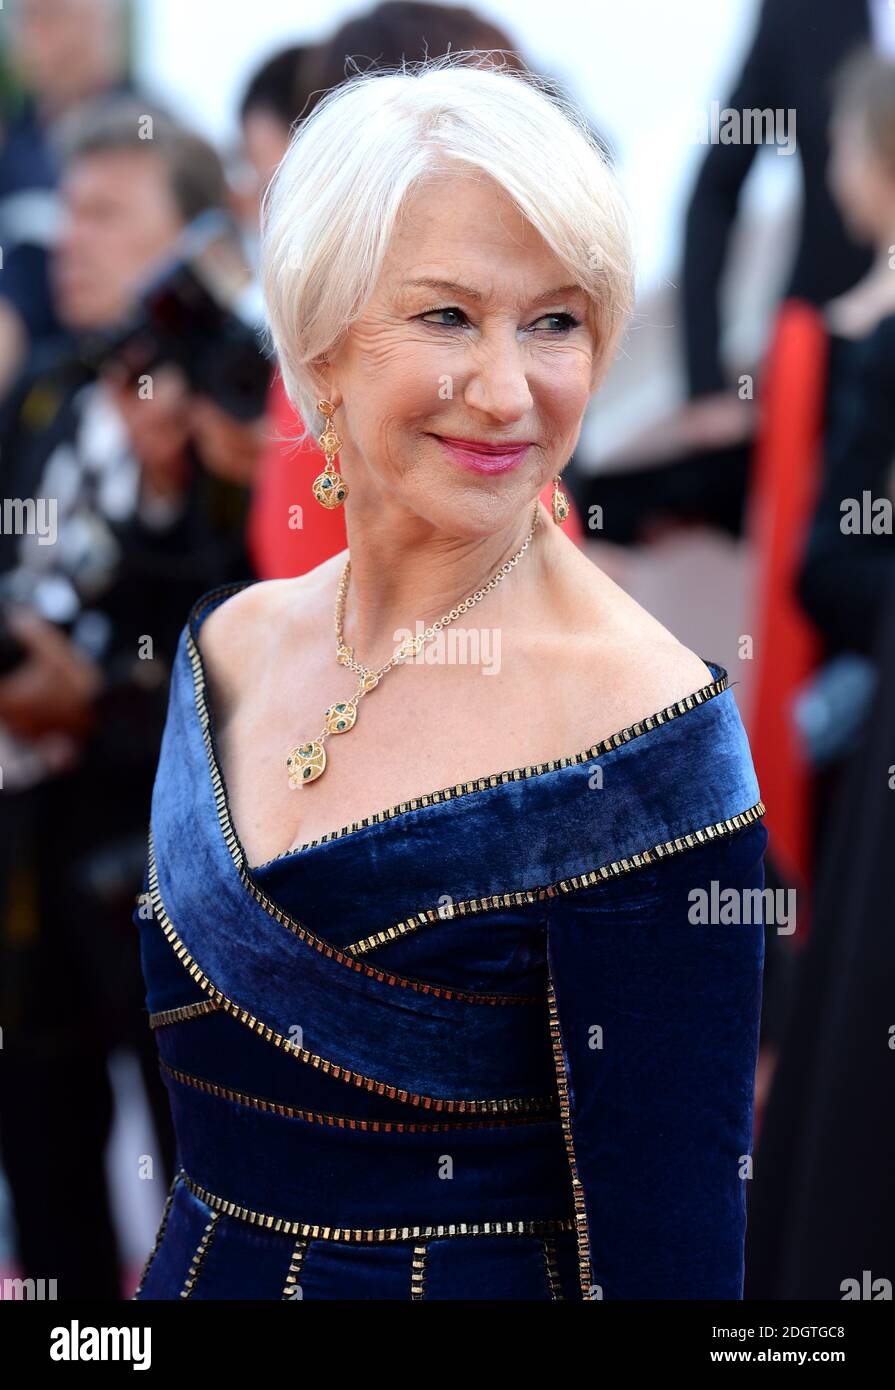 Helen Mirren attending the Girls of the Sun premiere as part of the 71st Cannes Film Festival Stock Photo